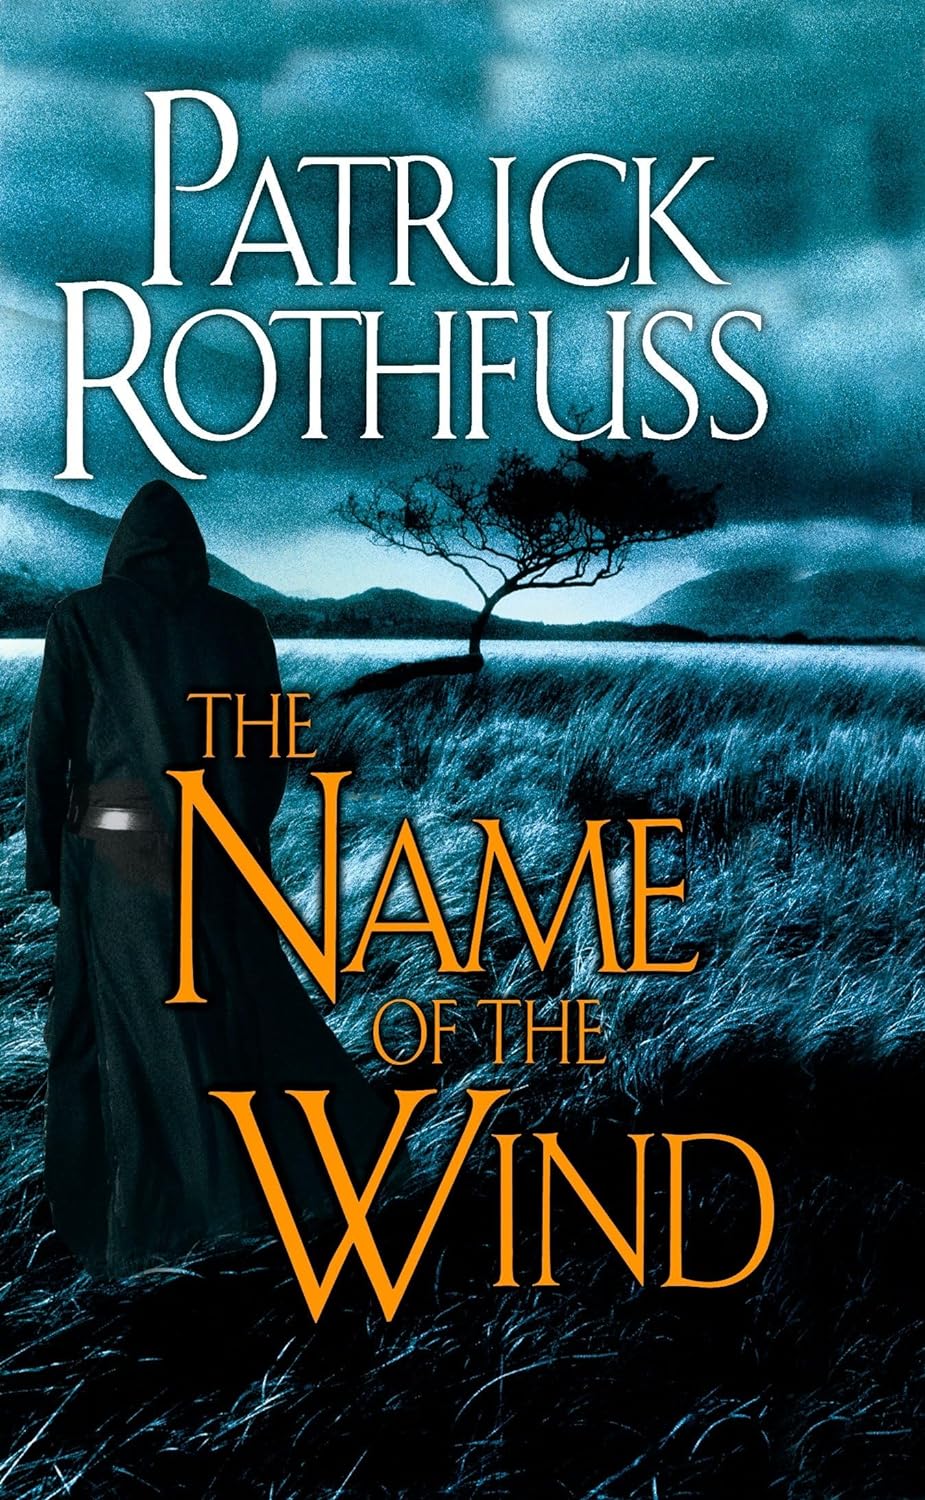 The Name of the Wind, by Patrick Rothfuss